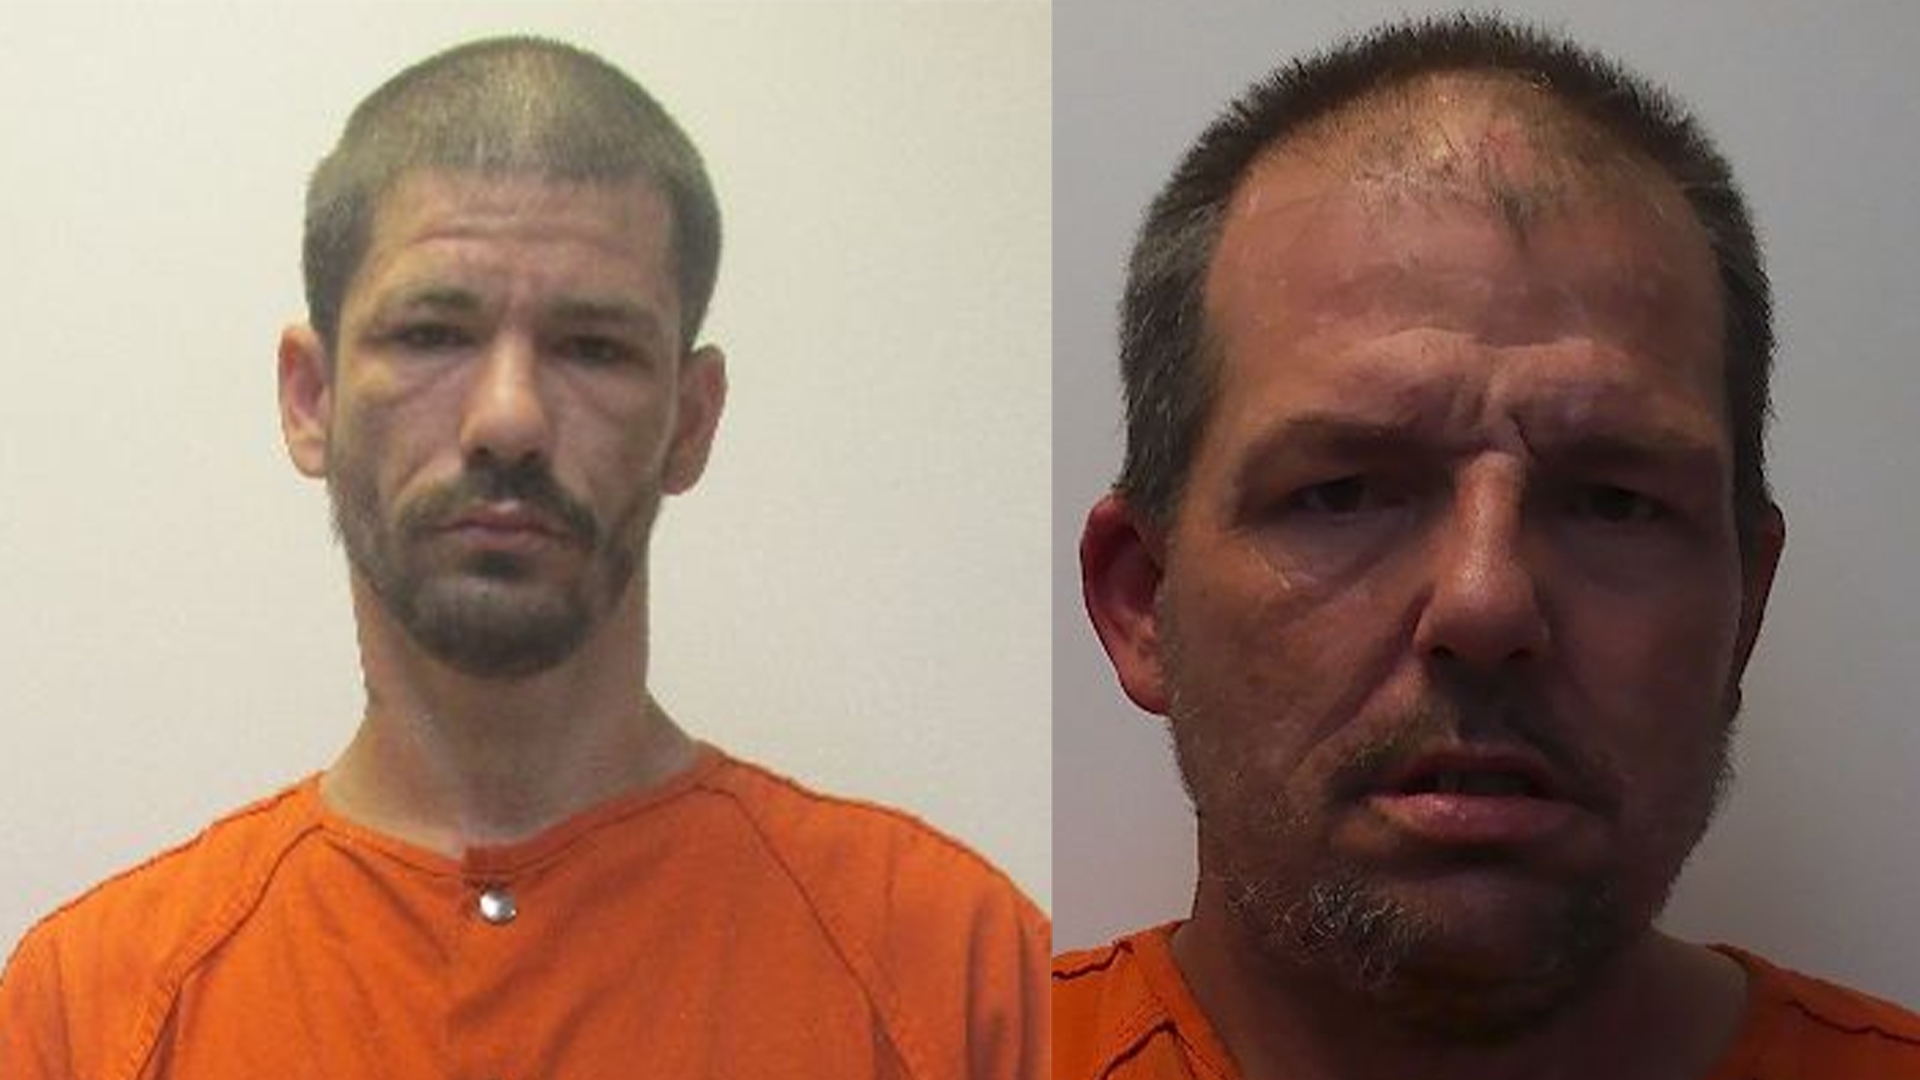 Johnathan Collins and Clinton Woosley are facing criminal charges for stealing copper and resisting law enforcement.